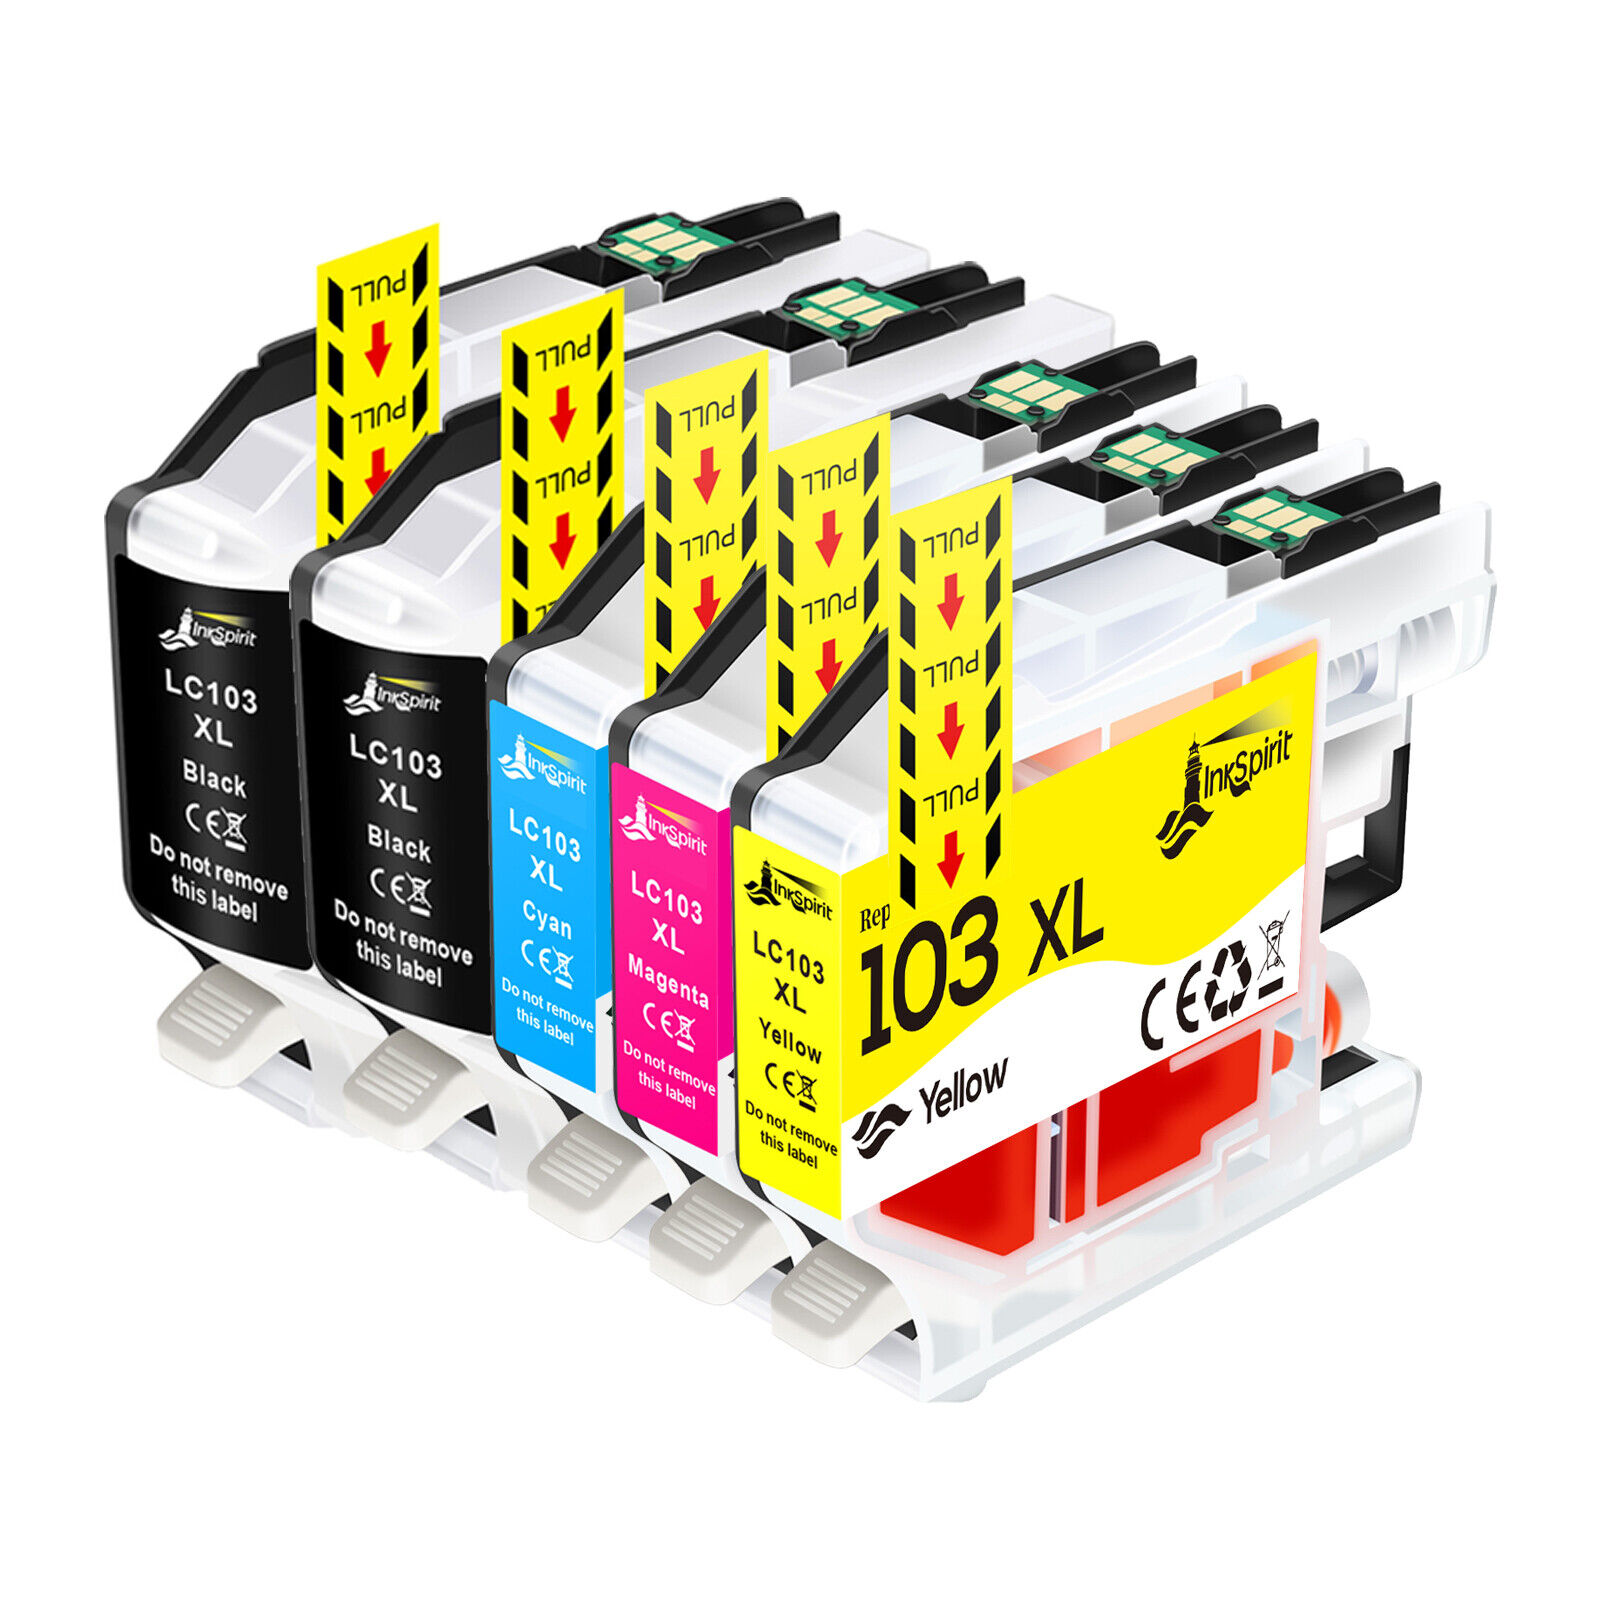 2-20 PK Ink Cartridge for Brother LC103XL LC-103 XL MFC-J470DW MFC-J475DW J870DW